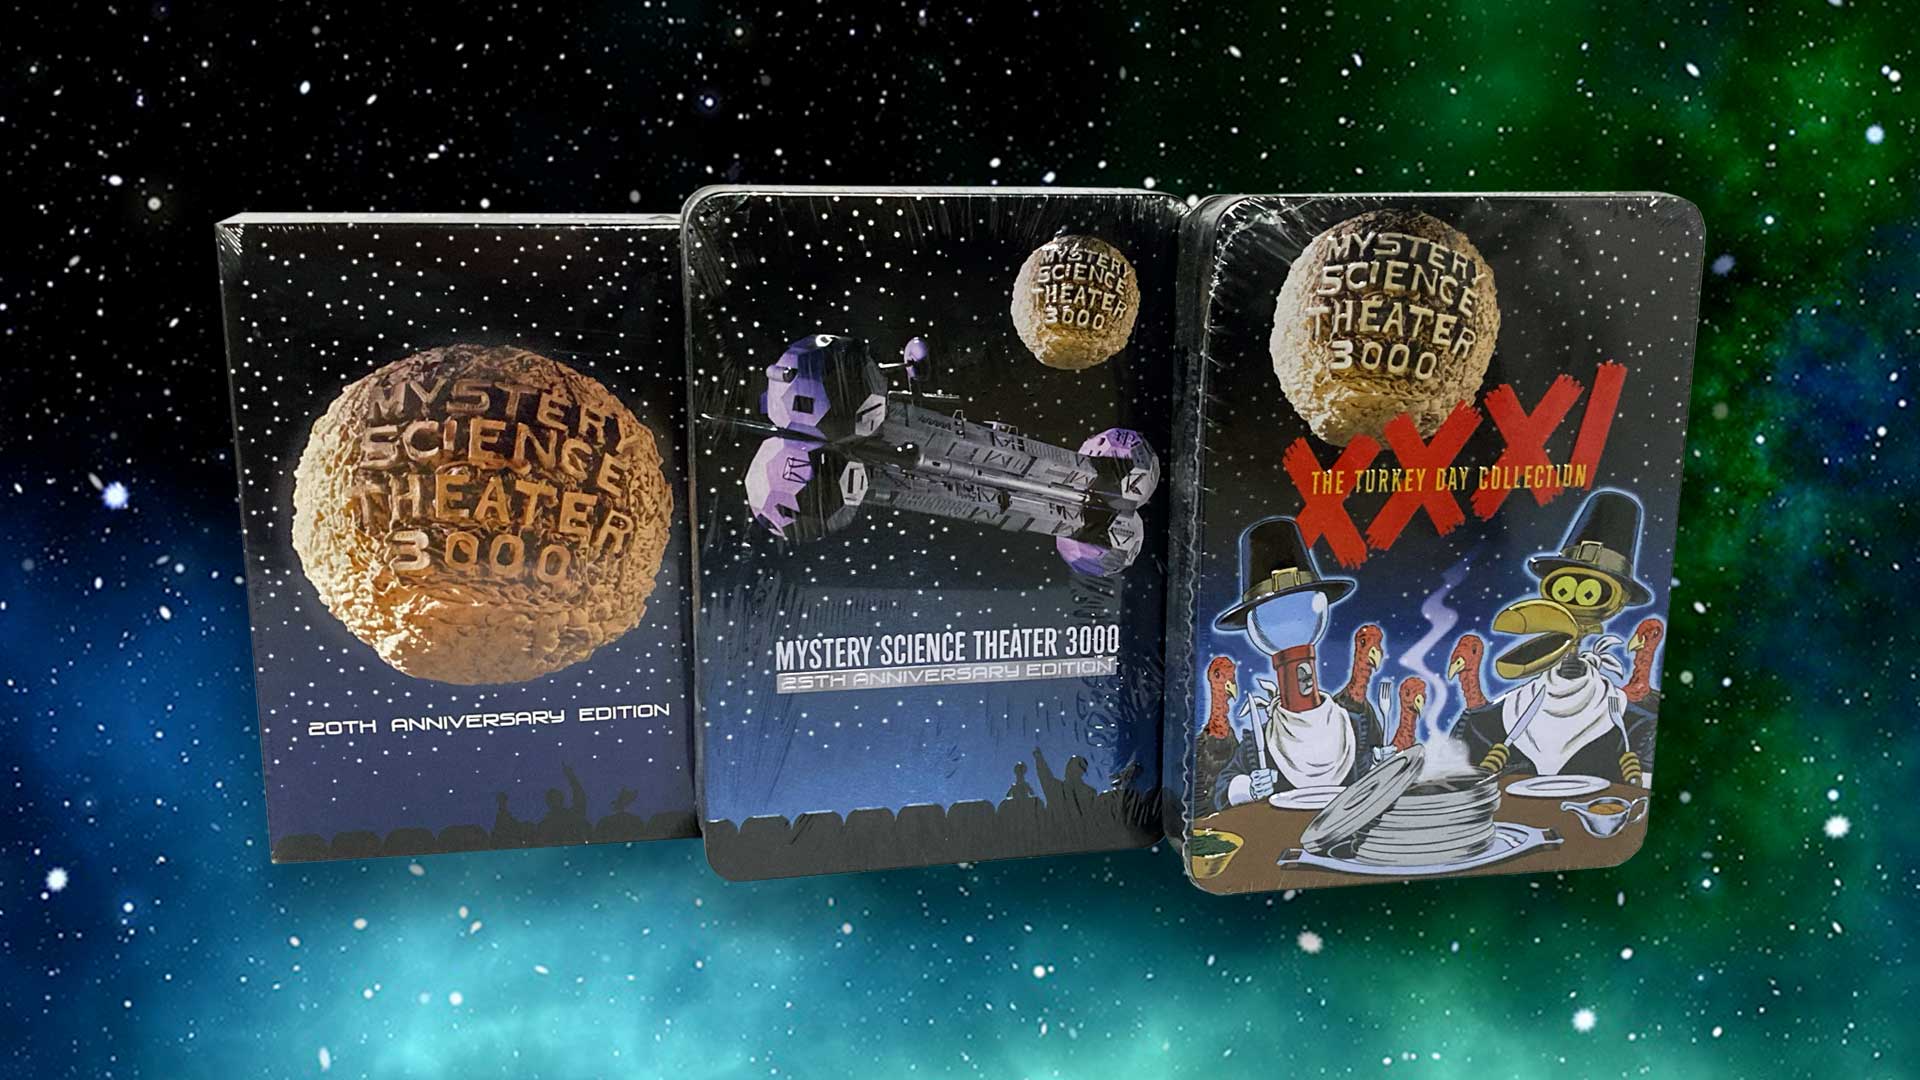 3 Mystery Science Theater 3000 DVD boxes floating in space